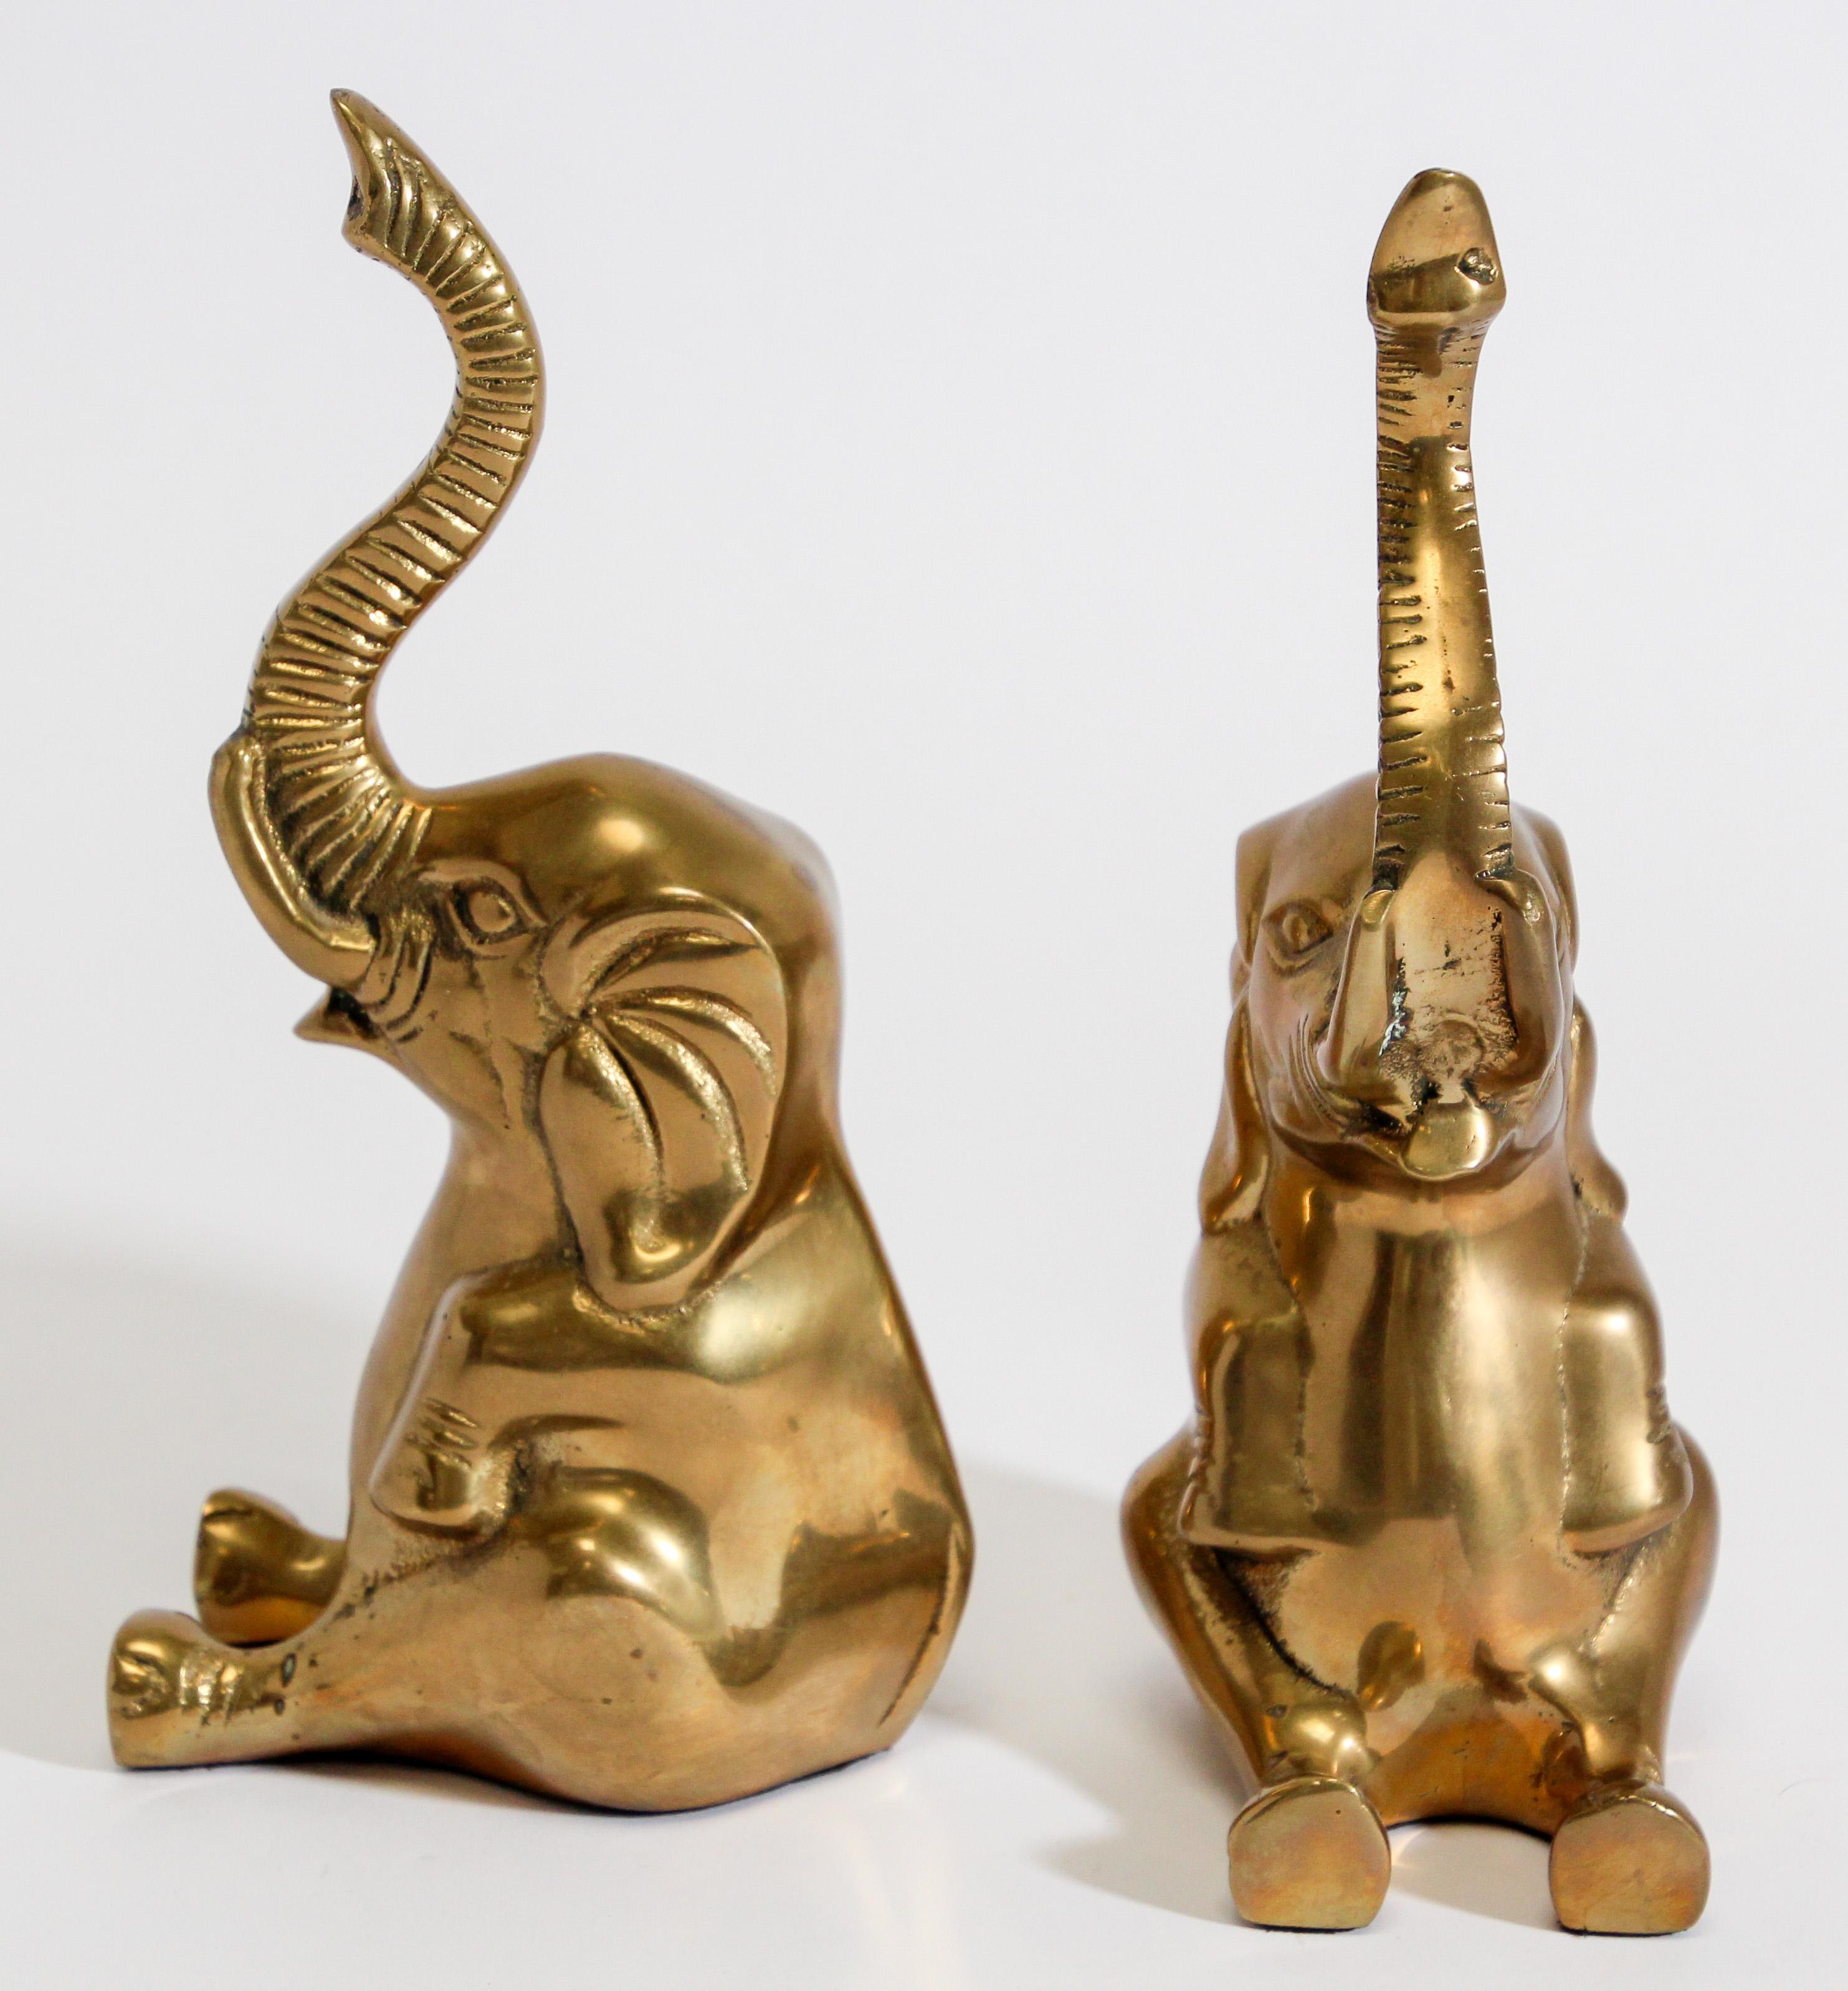 Anglo Raj Vintage Cast Brass Elephant Sculpture Book Ends Paper Weight